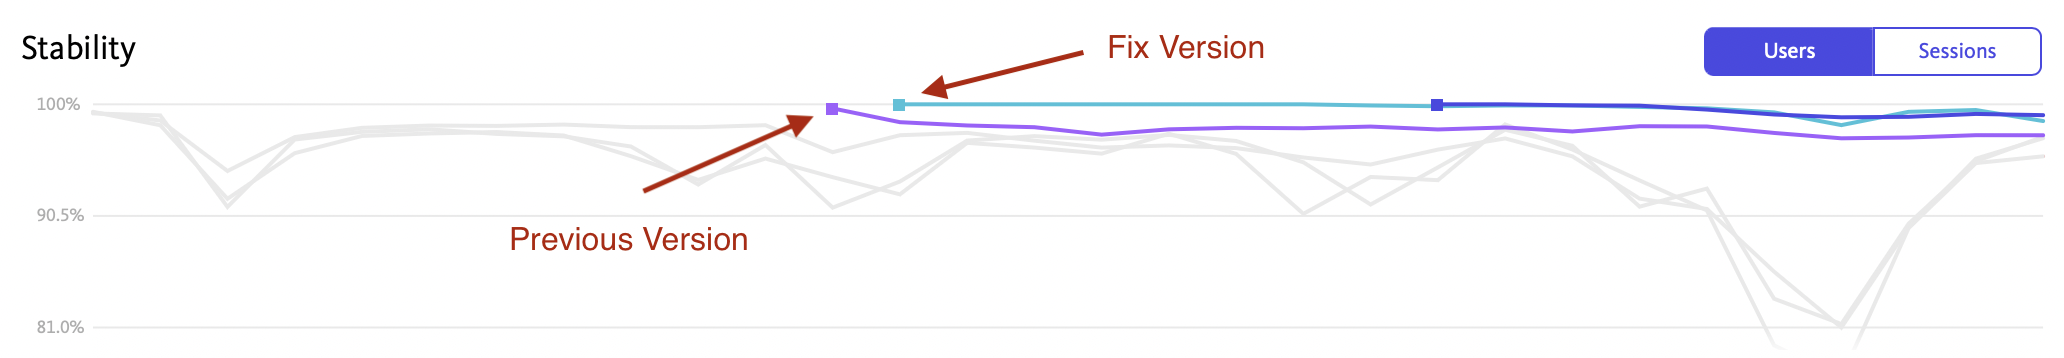 Line graph showing that the stability of the version with the fix is higher than the version without it.